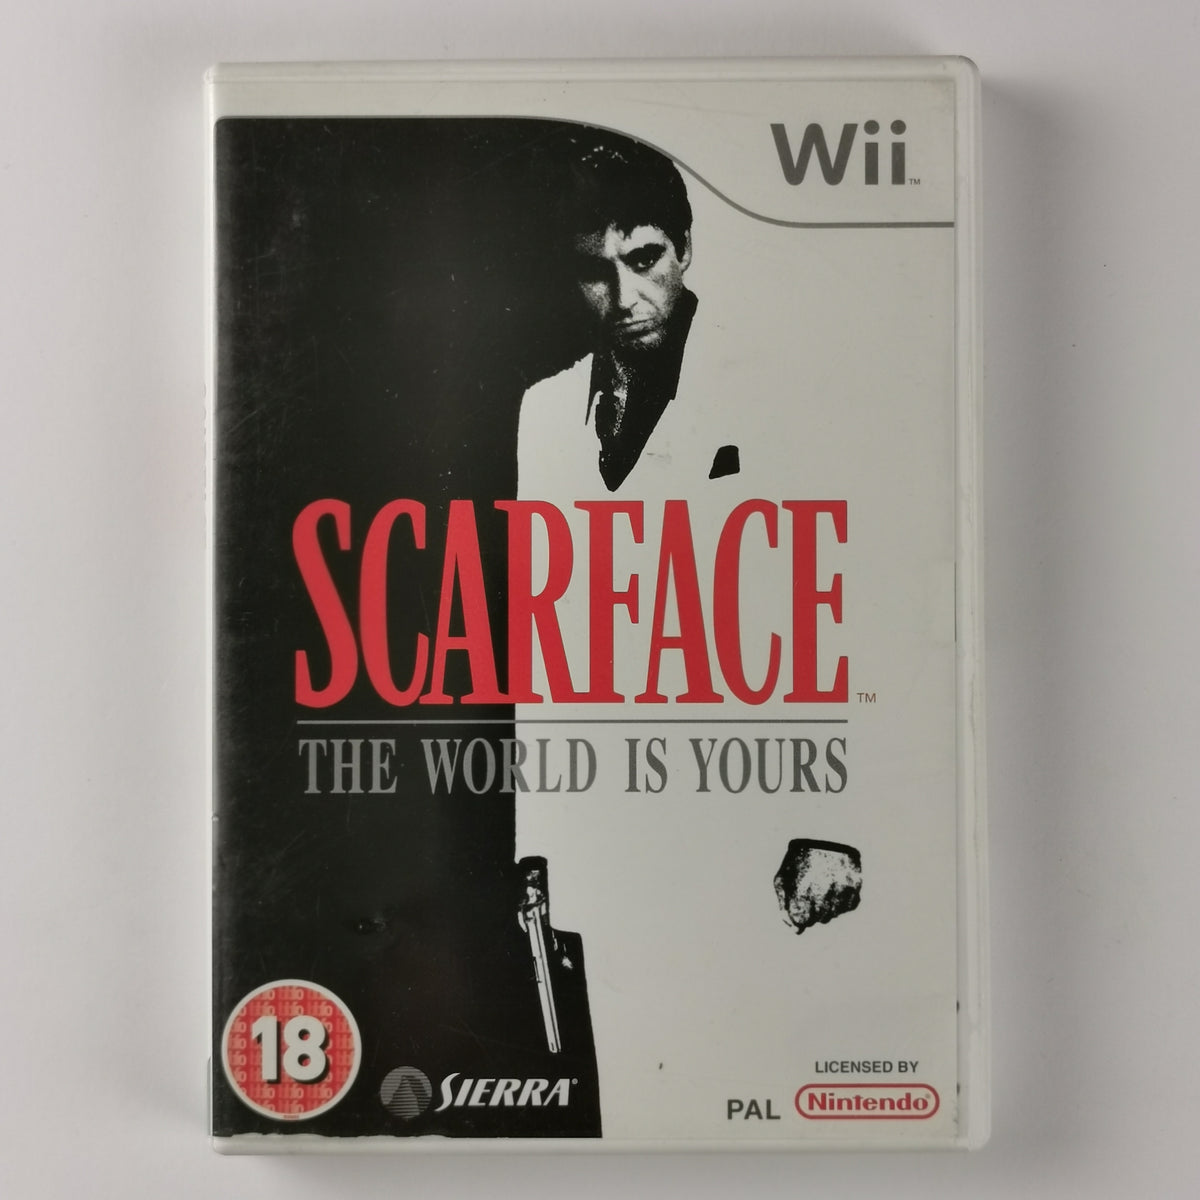 Scarface: The World is Yours [Wii]